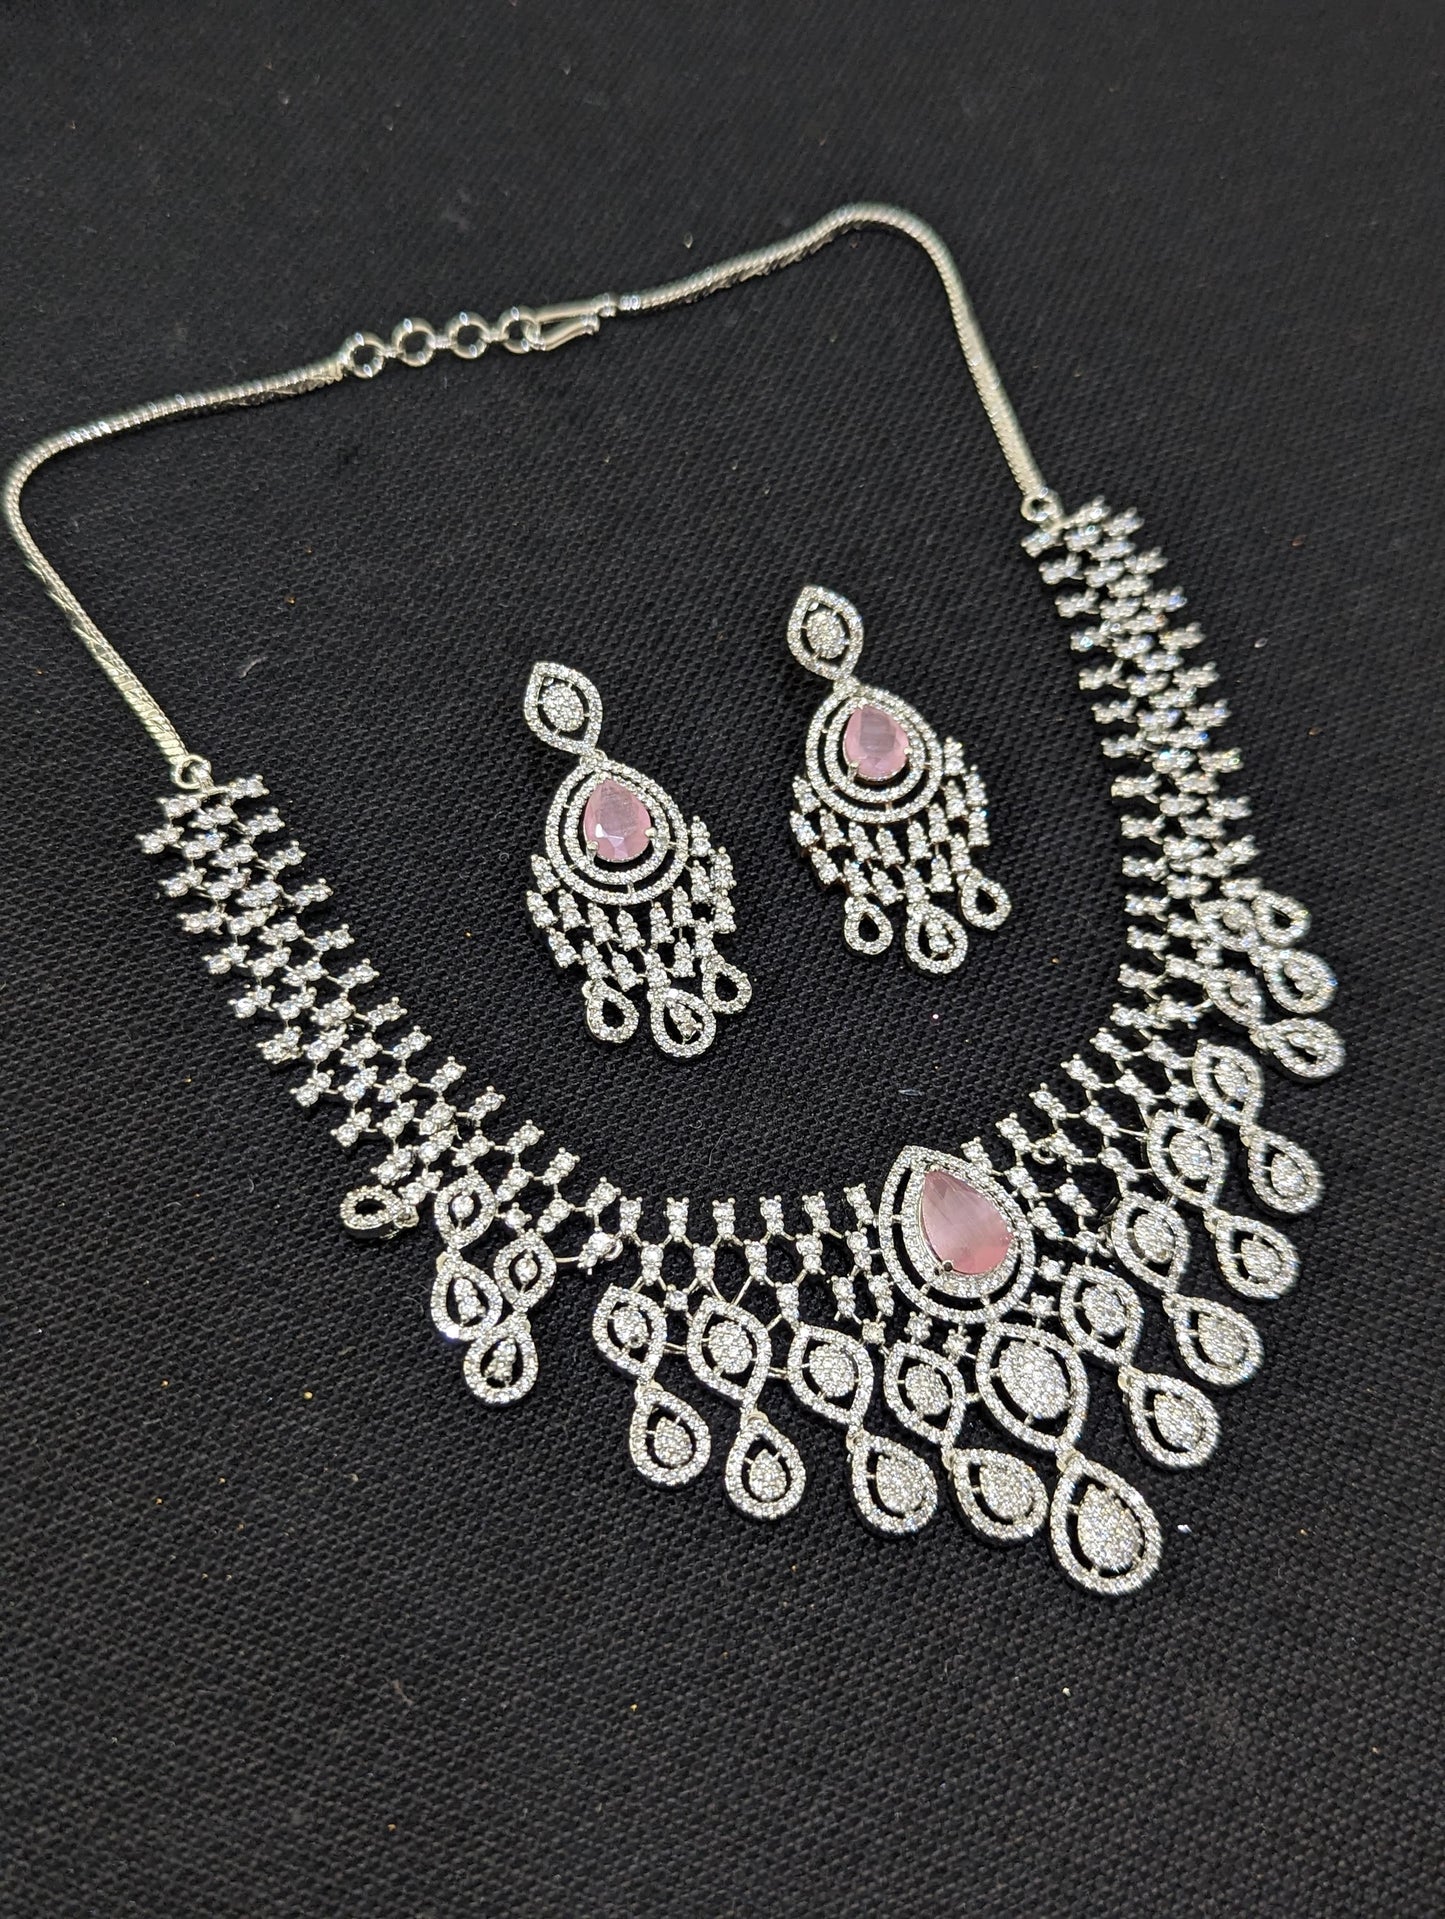 White gold plated Designer Necklace and Earrings set